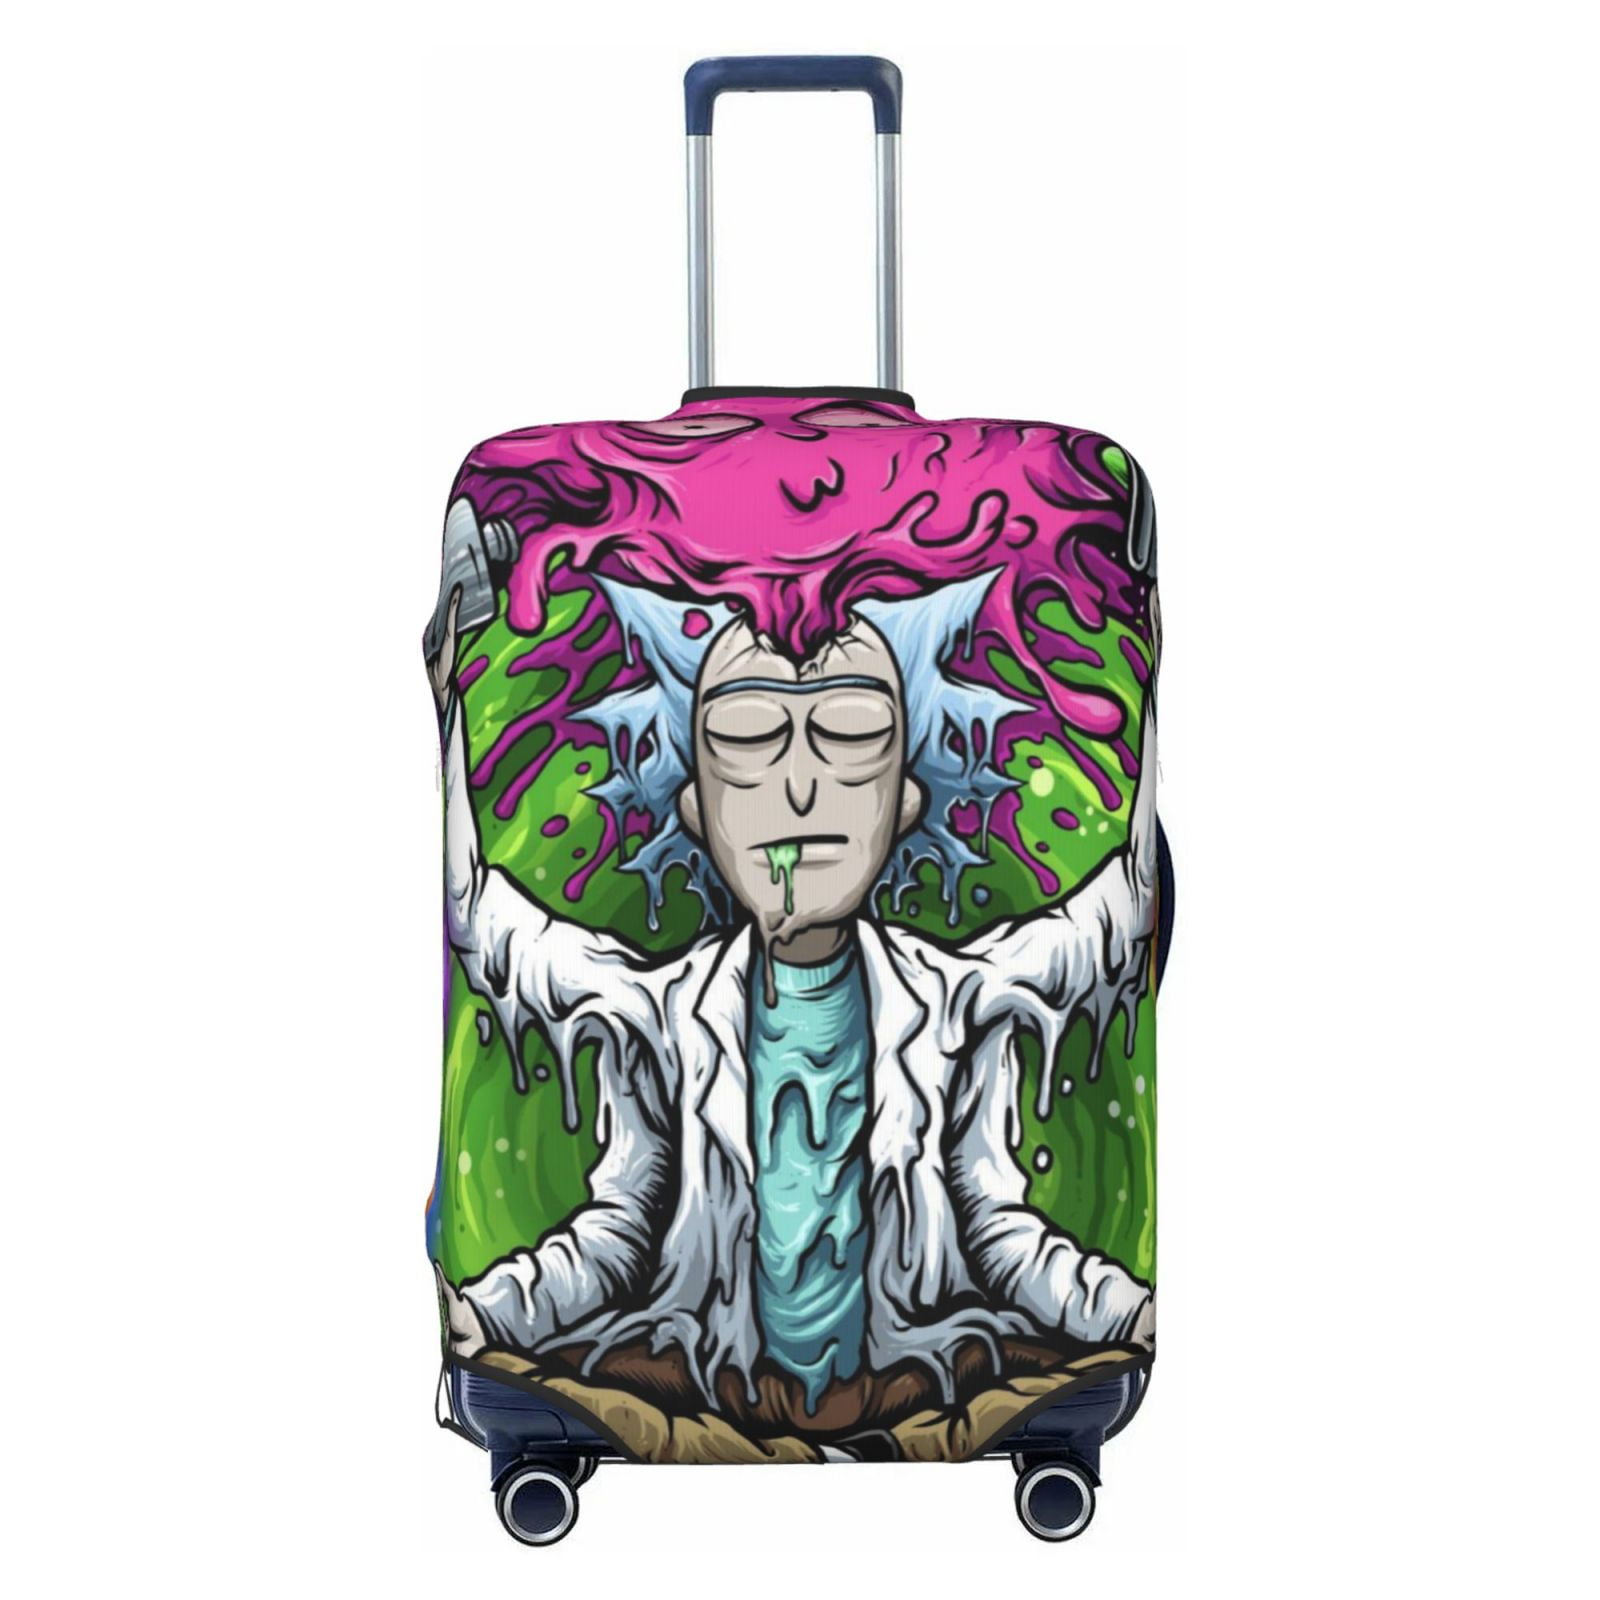 Rick And Morty Luggage Cover, Anime Travel Suitcase Protector, Fits 18 ...